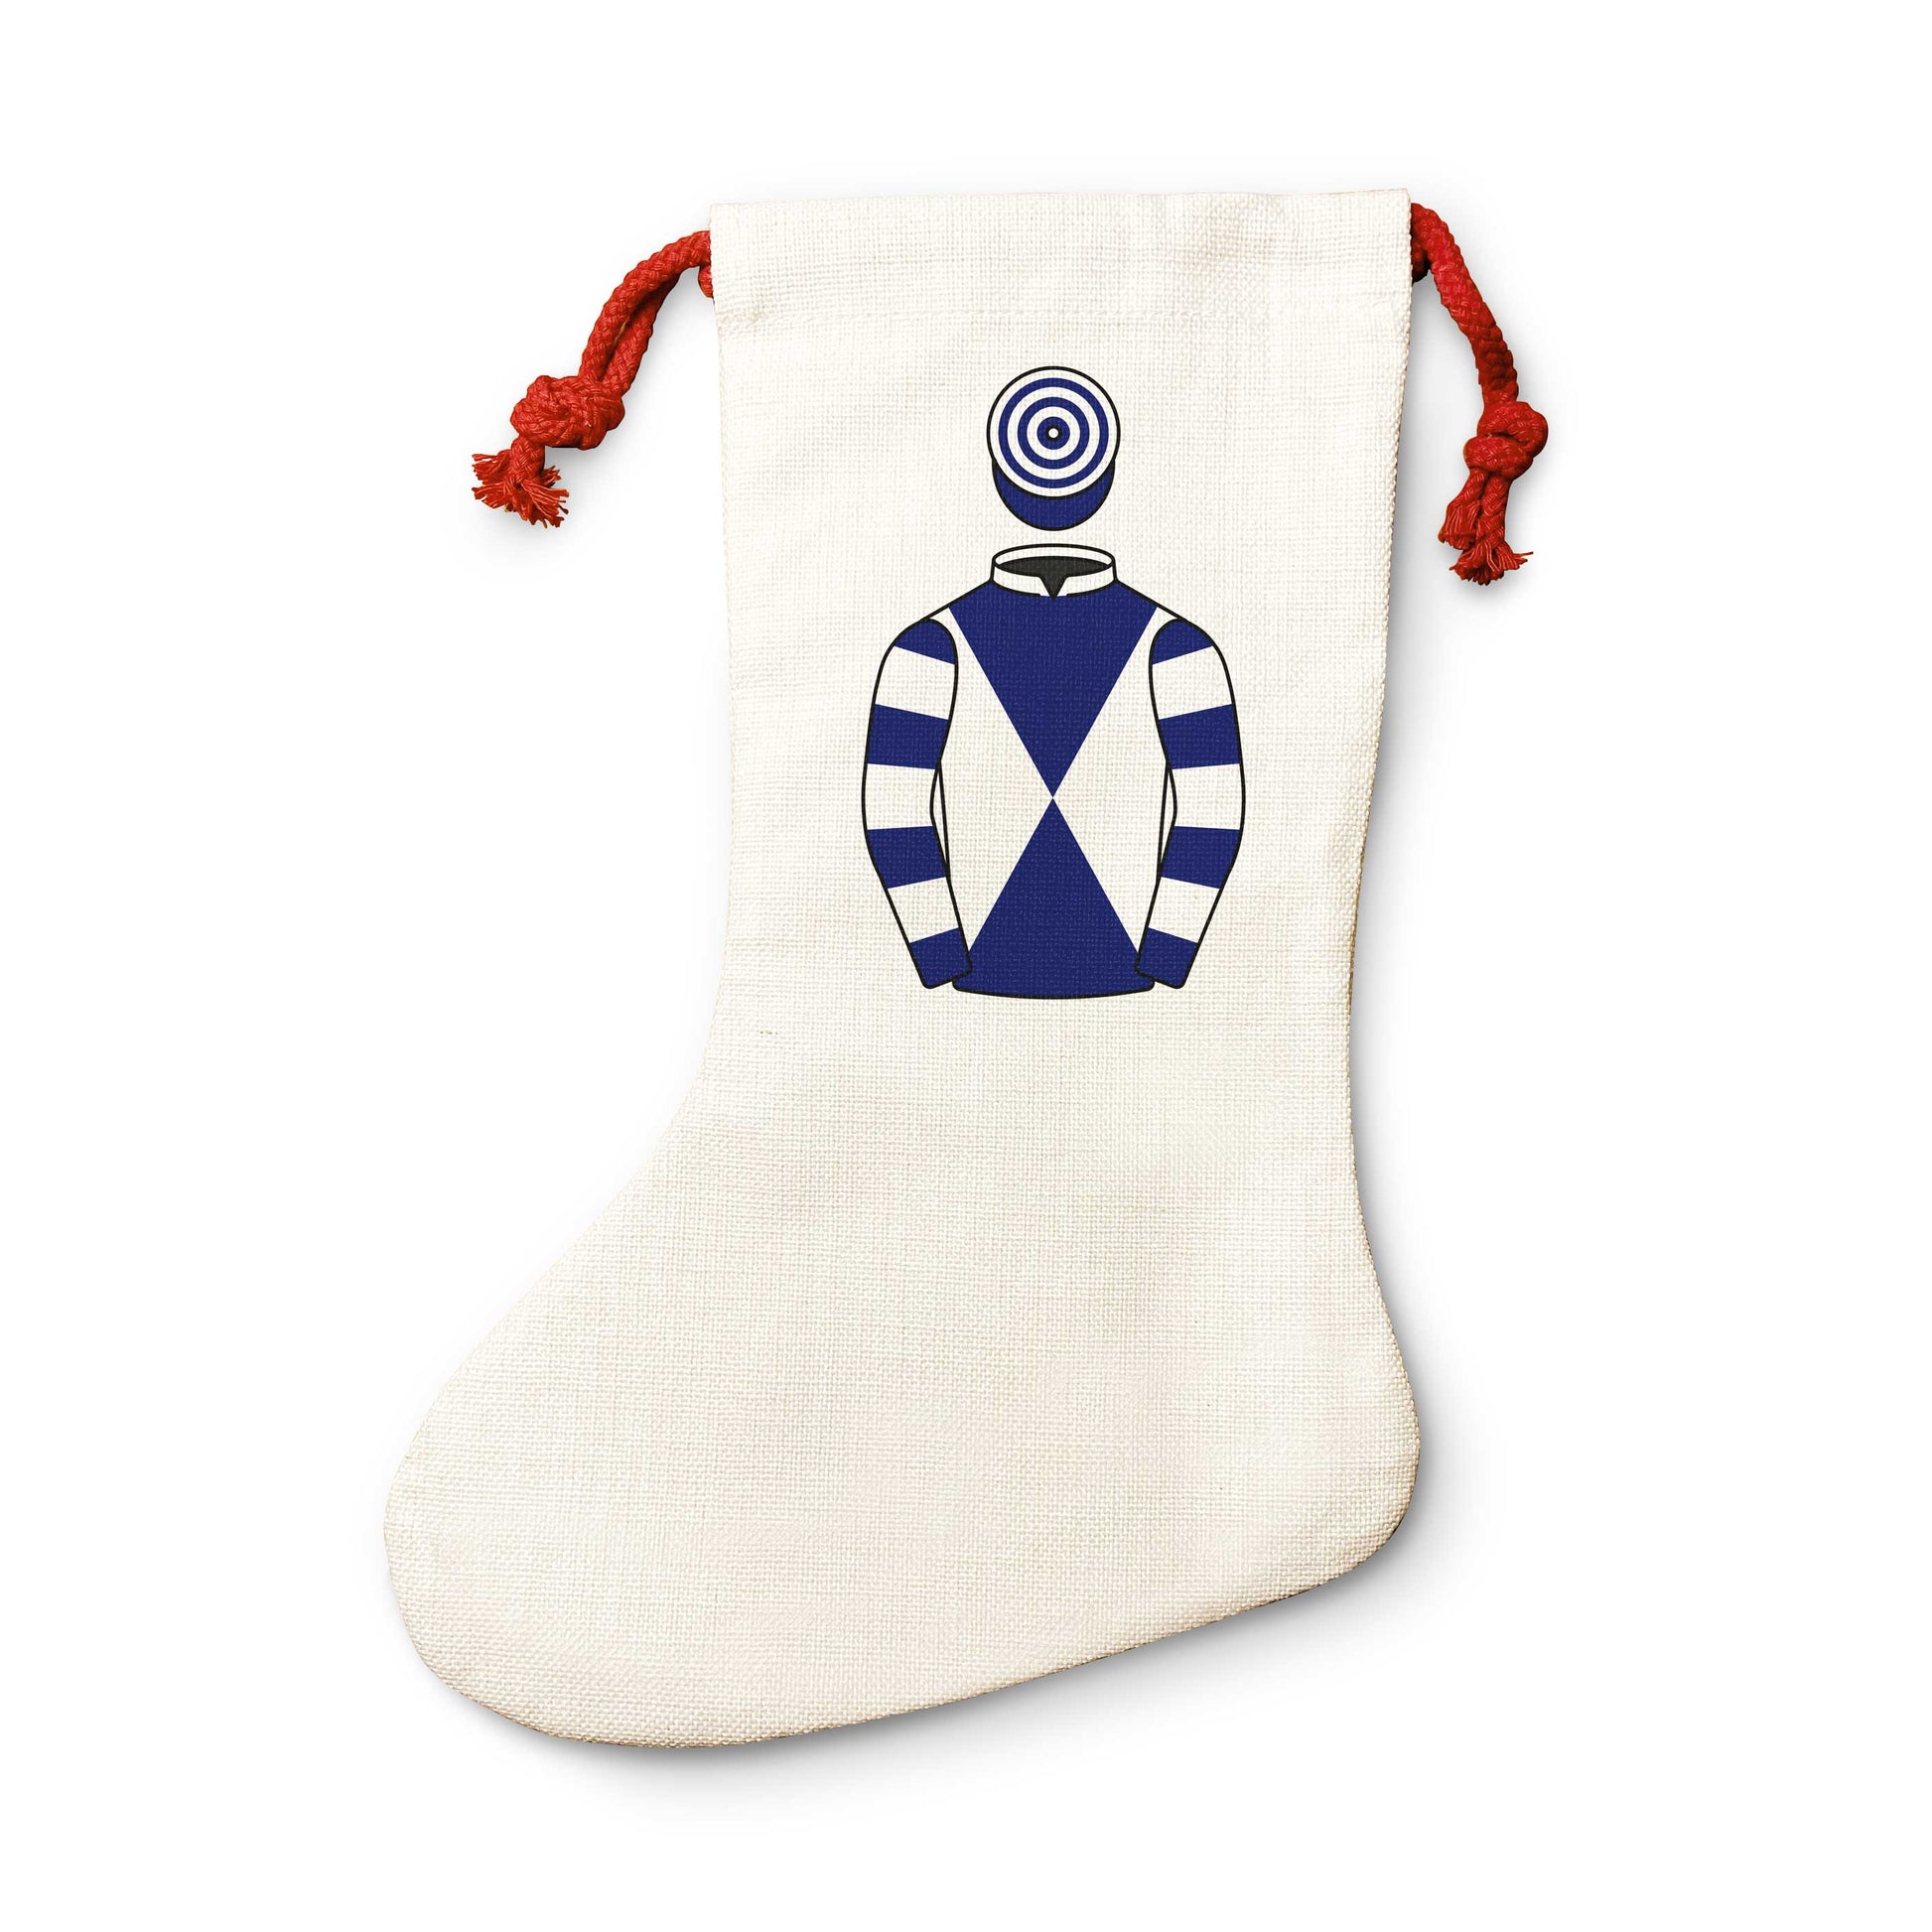 Walters Plant Hire Ltd Christmas Stocking - Christmas Stocking - Hacked Up